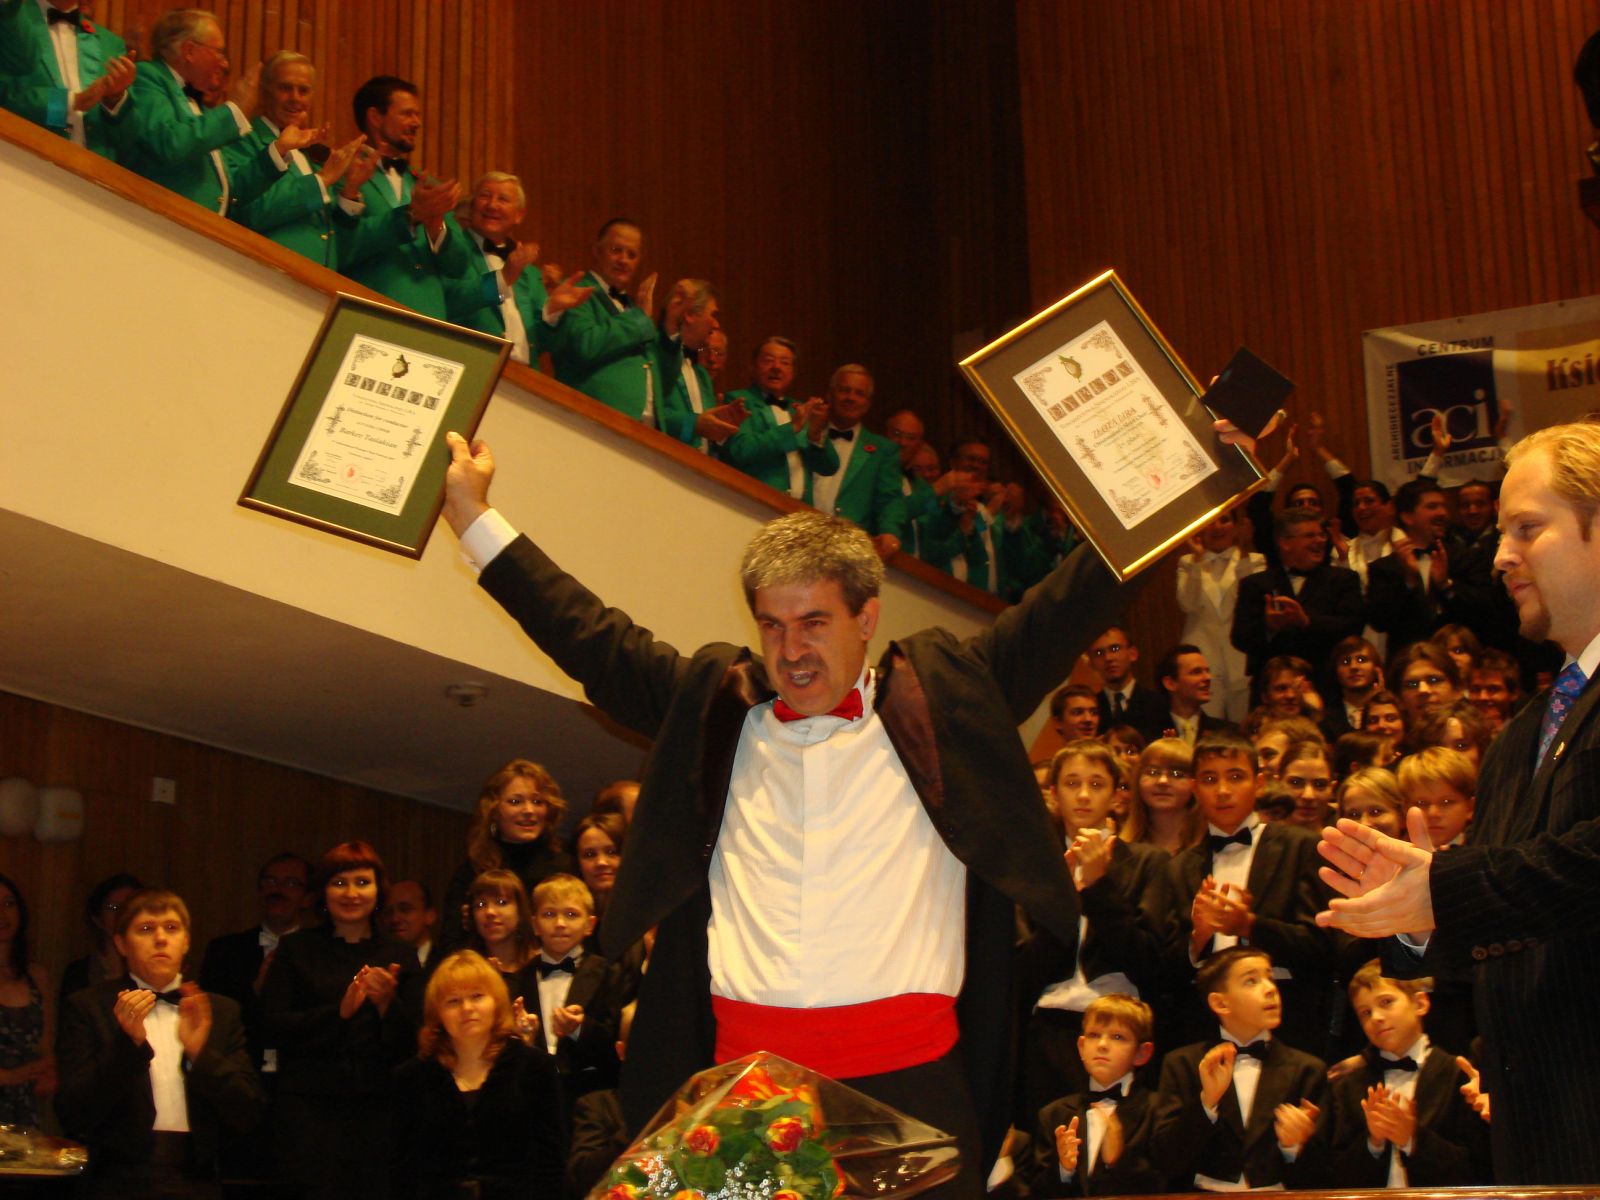 The Fayha Choir was just two years old when it won the second prize at the “International Warsaw Choir Festival-2005.” Only two years later, the choir won first prize for both Best Choir and Best Conductor at the same festival. (Photo: fayhachoir.org)